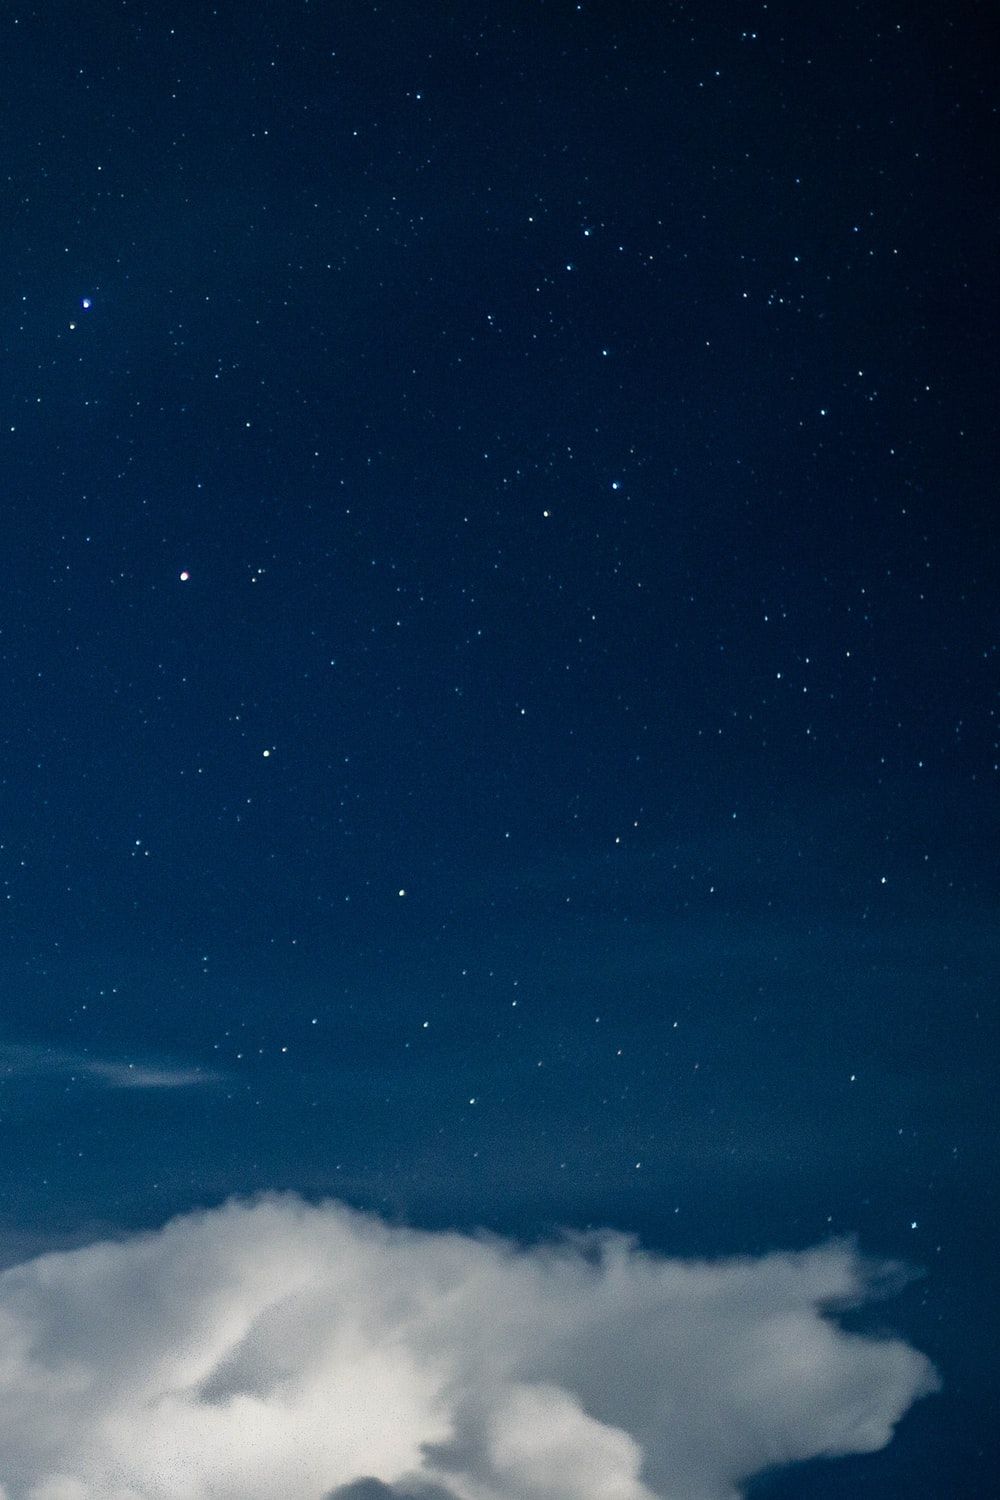 Night Sky Wallpapers: Free HD Download [500+ HQ]